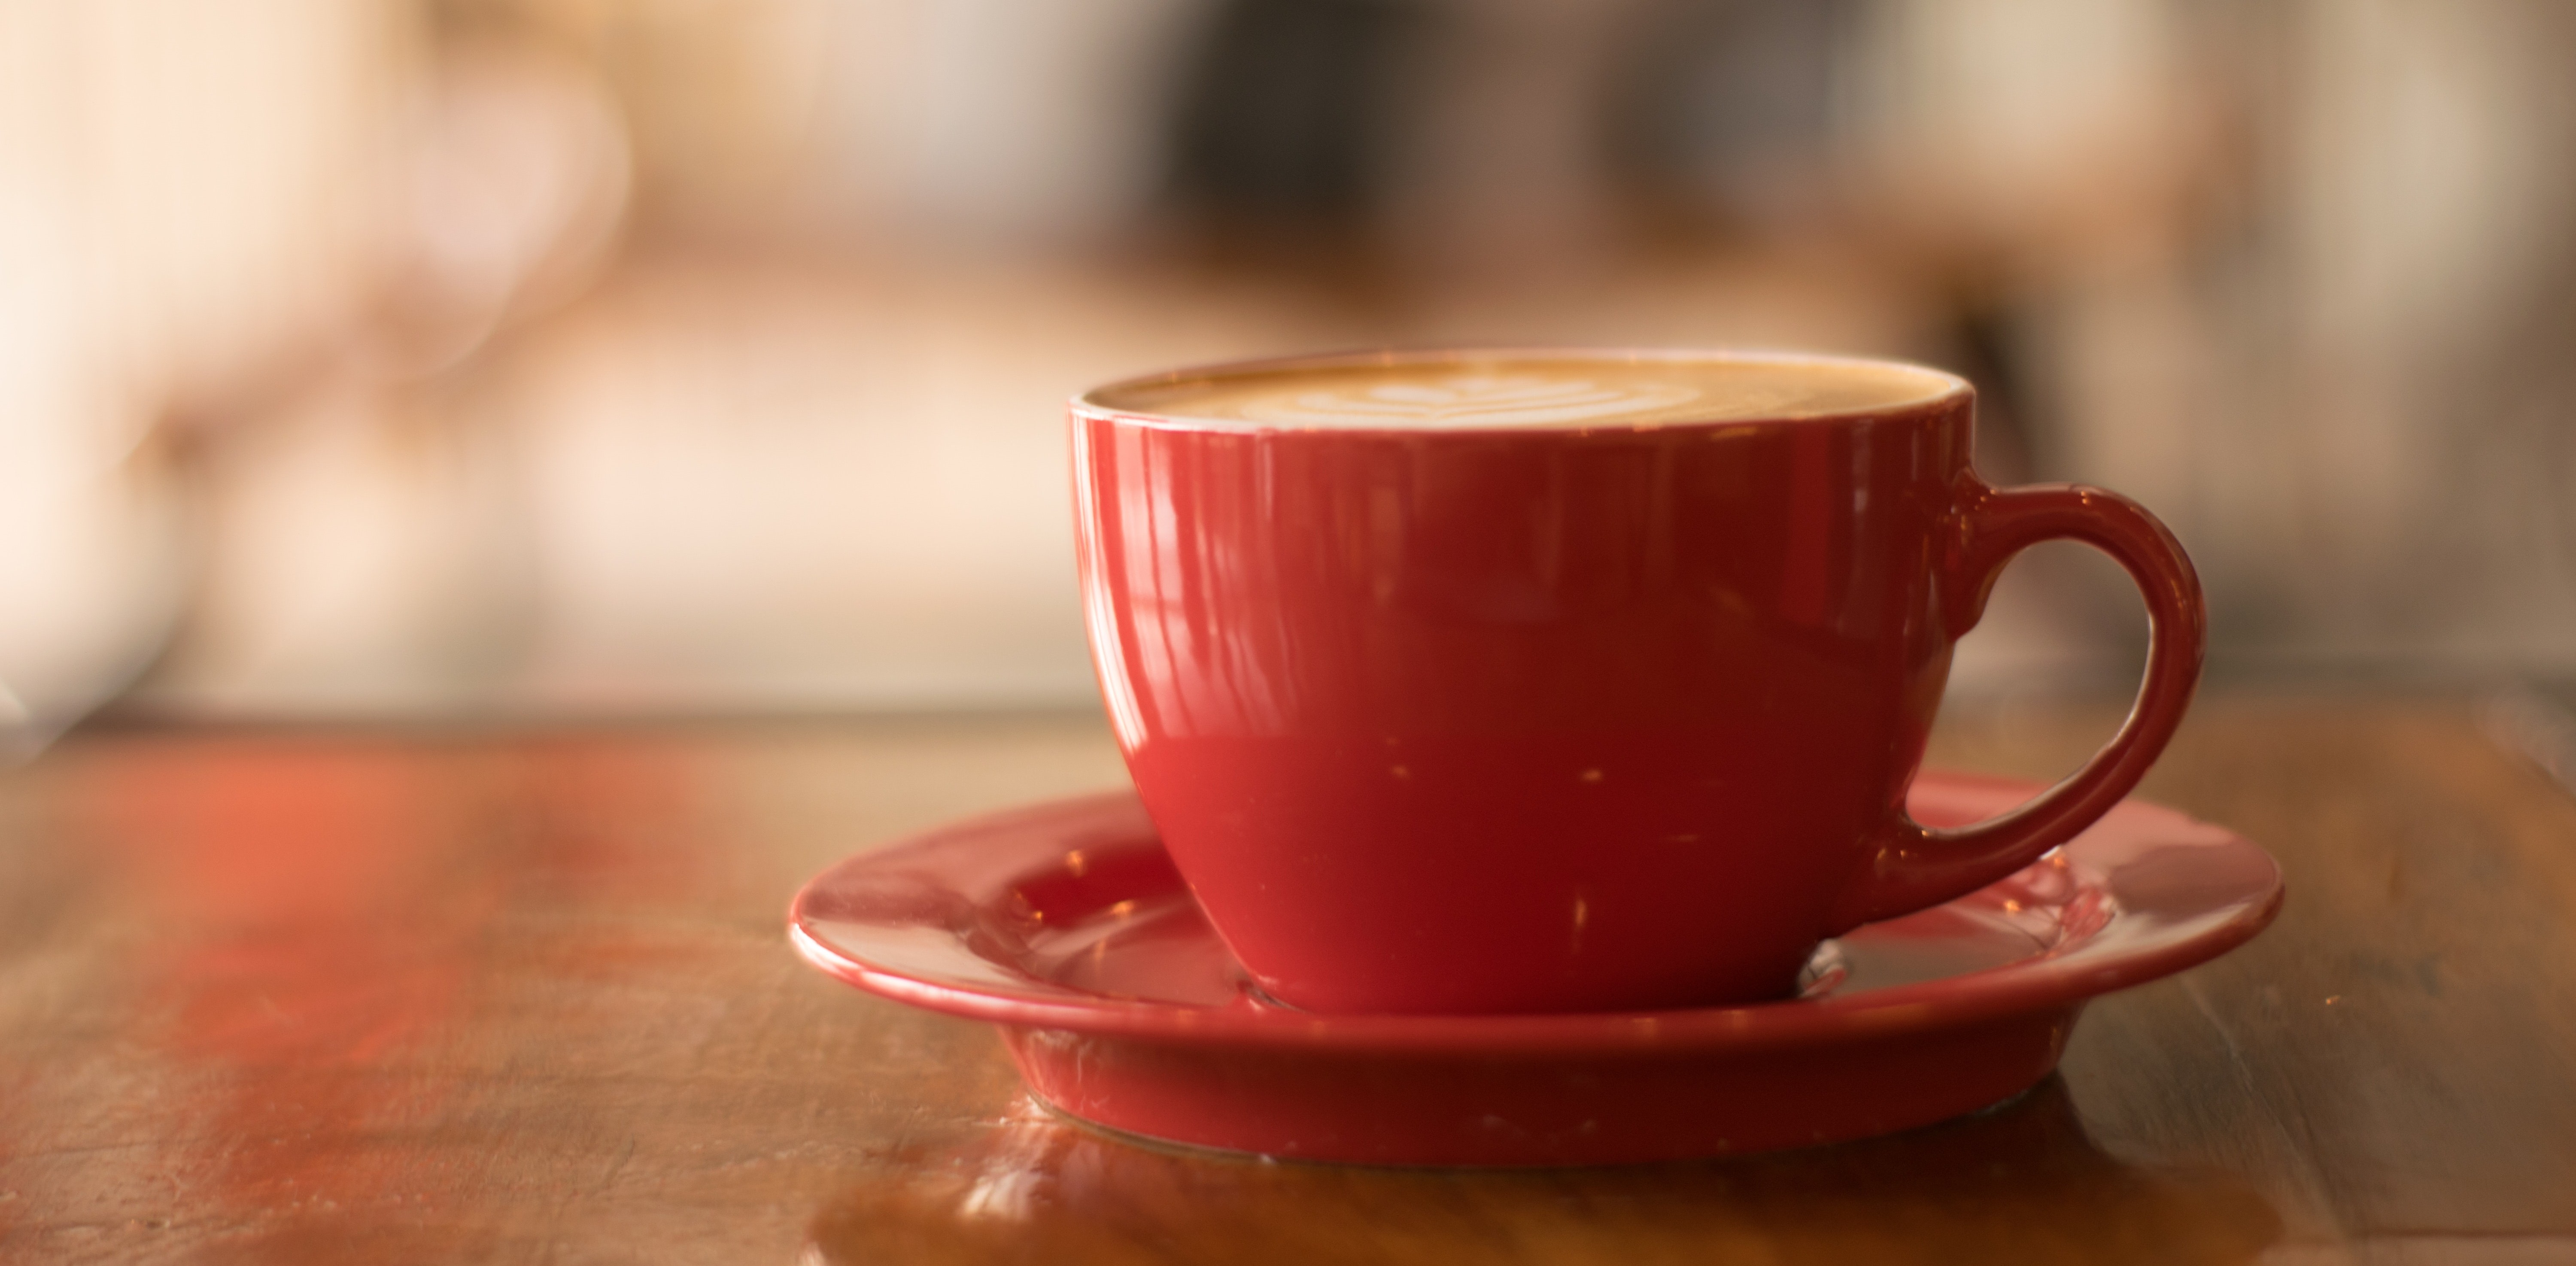 Red coffee cup, sitting on red saucer and filled with coffee.